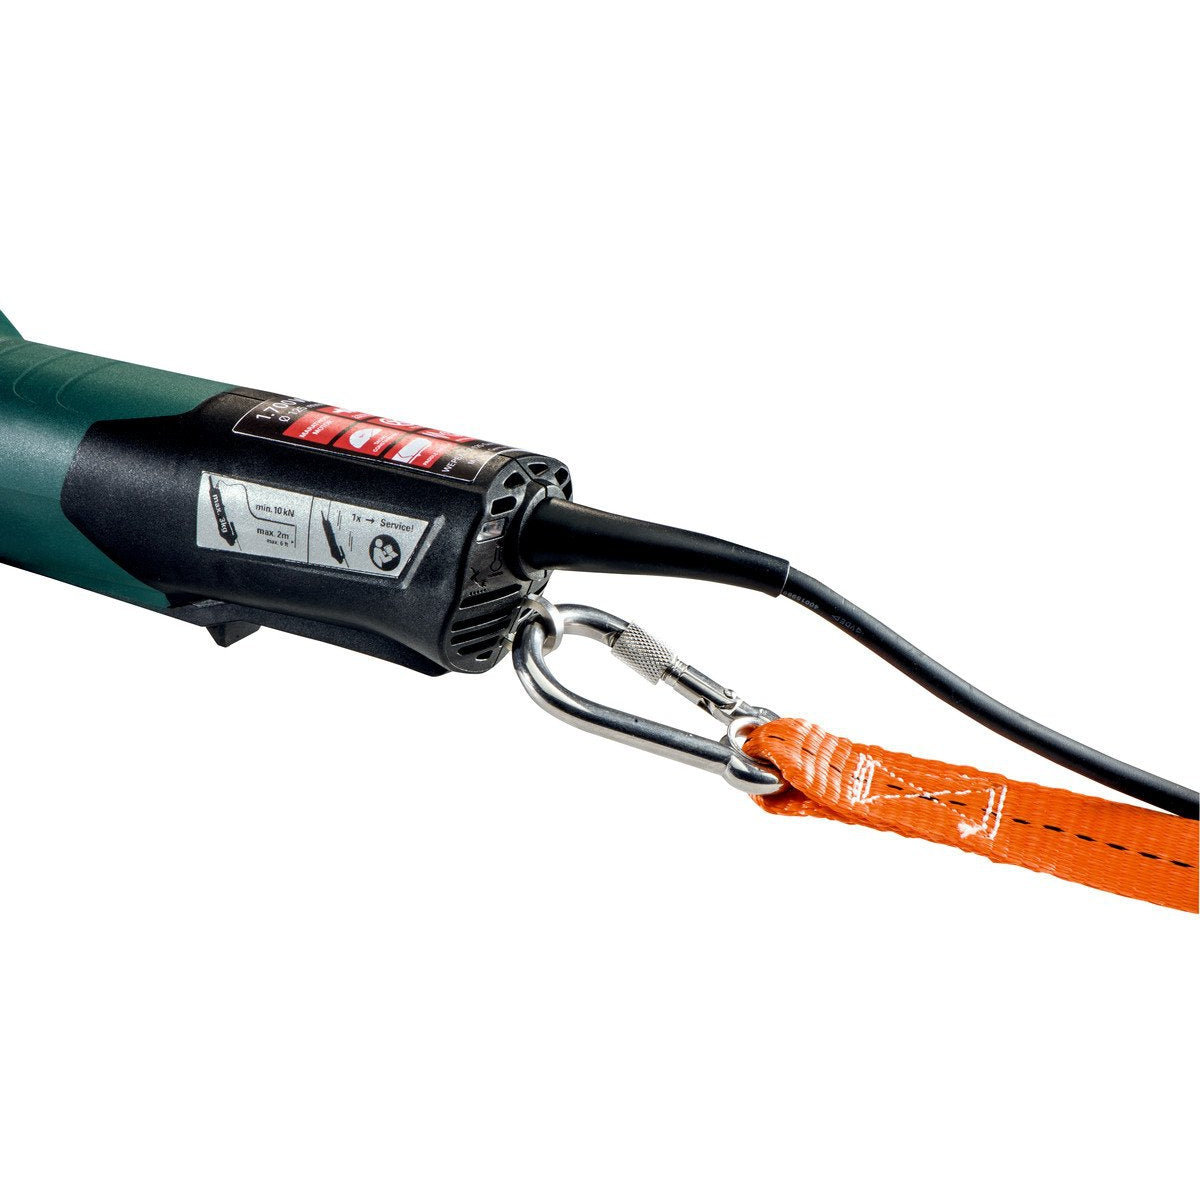 Metabo WEPBA 17-125 5" Q DS M-Brush Angle Grinder - 613114420